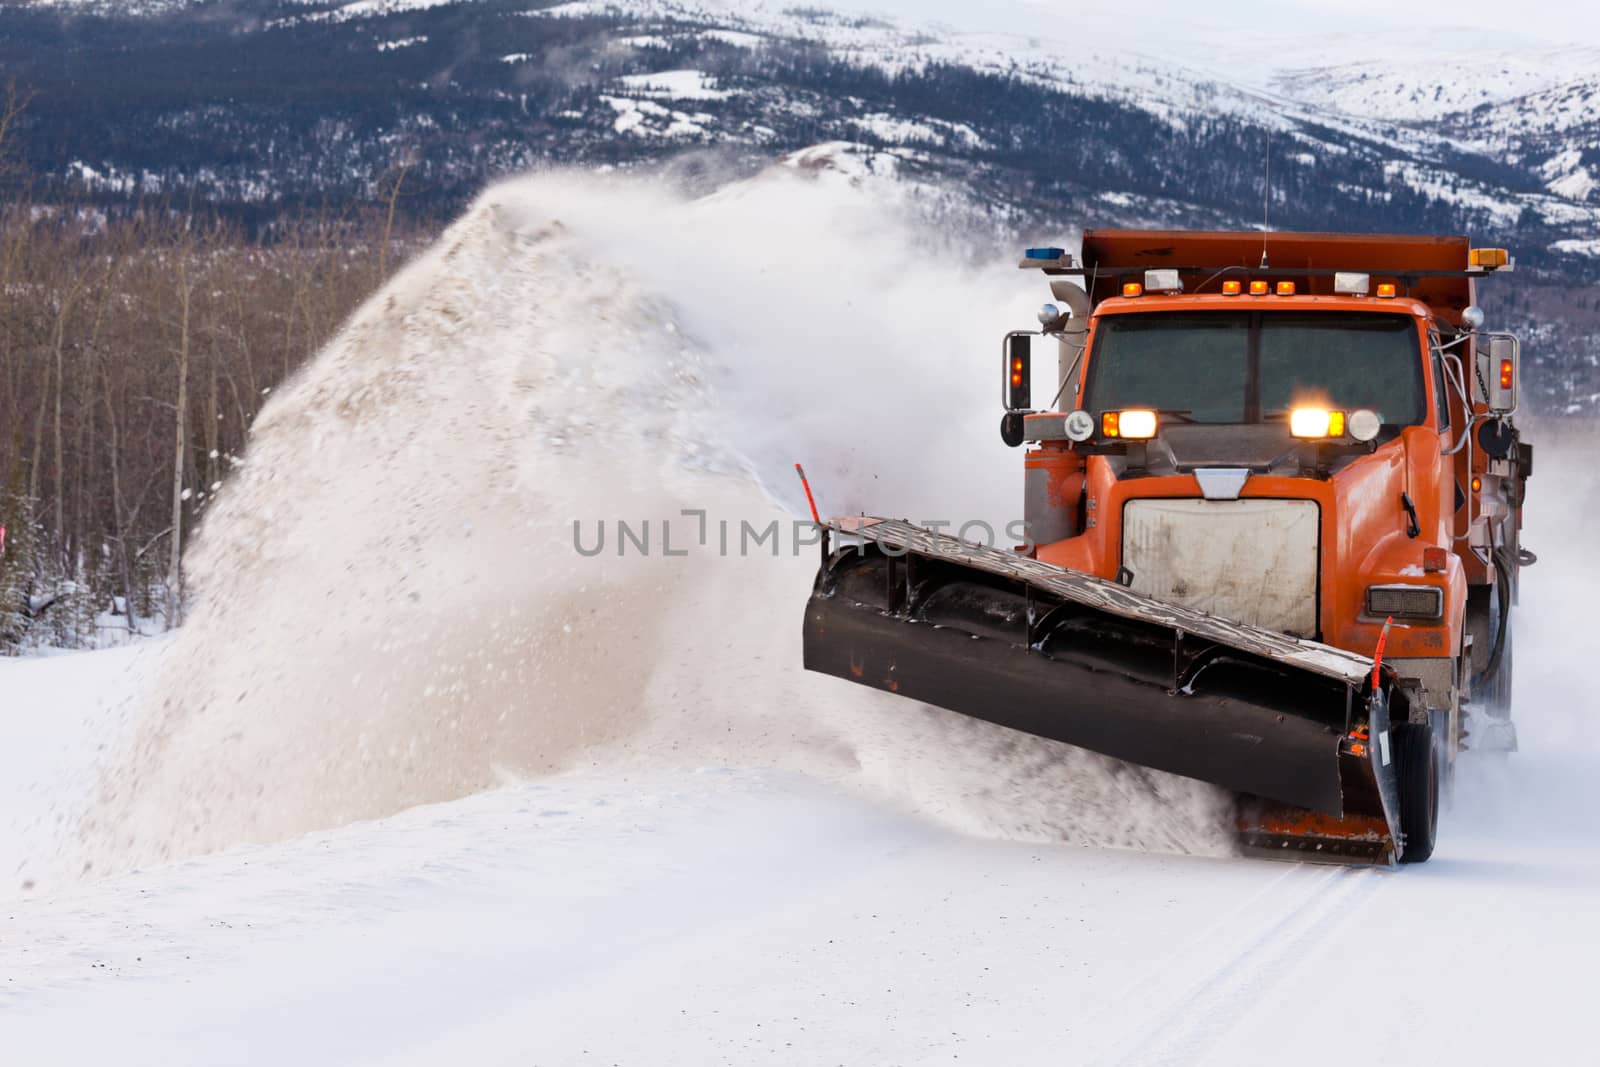 Snow plough clearing road in winter storm blizzard by PiLens